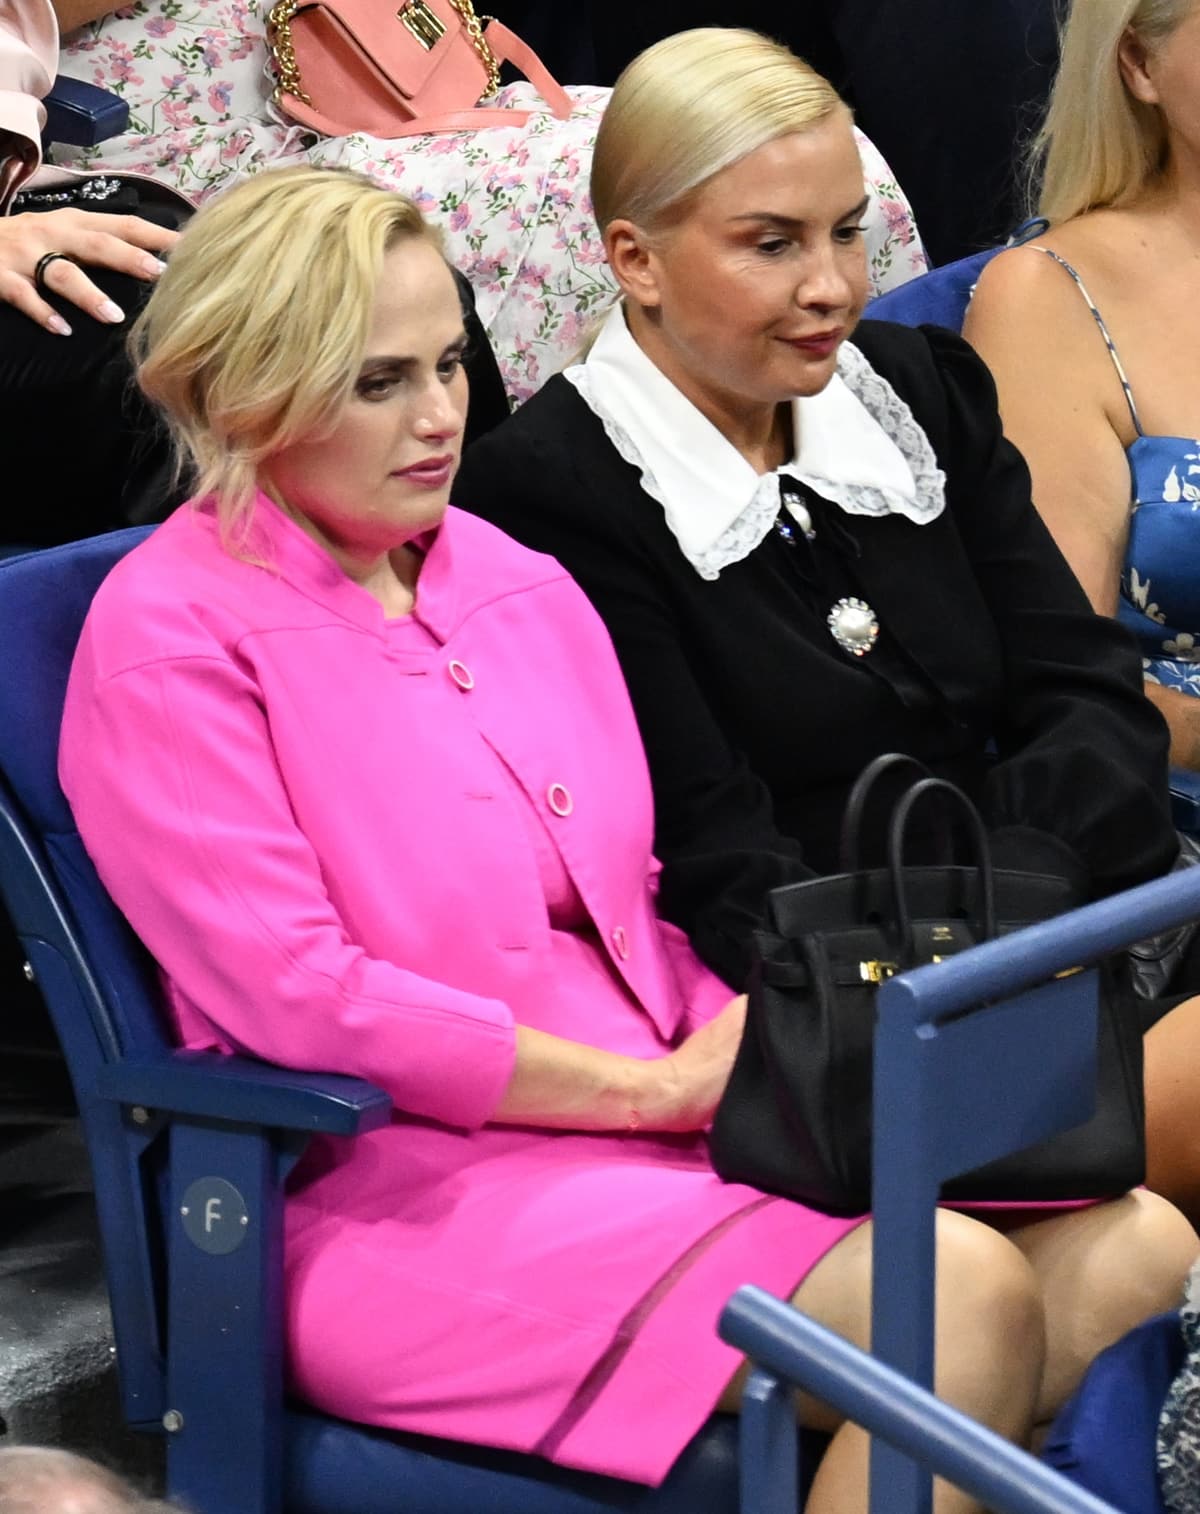 Rebel Wilson and her girlfriend Ramona Agruma attend the victory of Serena Williams of the USA on Day 1 of the US Open 2022